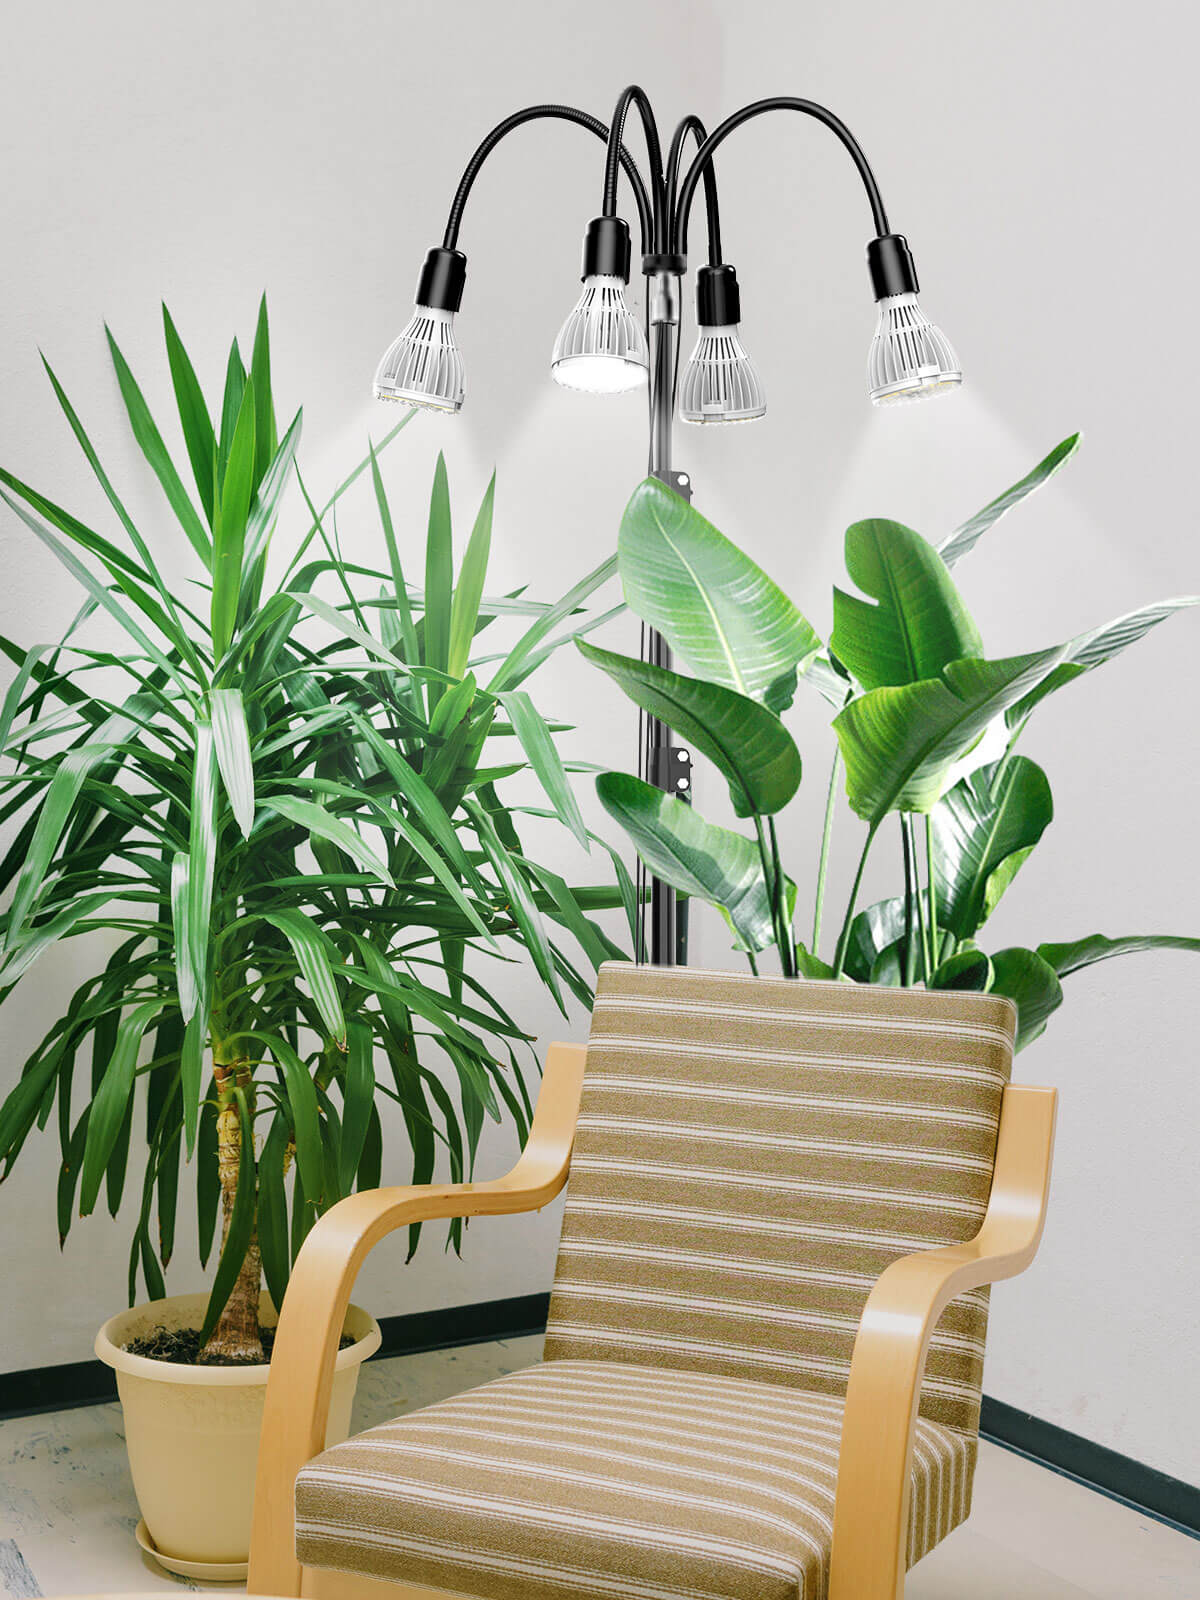 SANSI 120W Floor Plant Light with Stand.